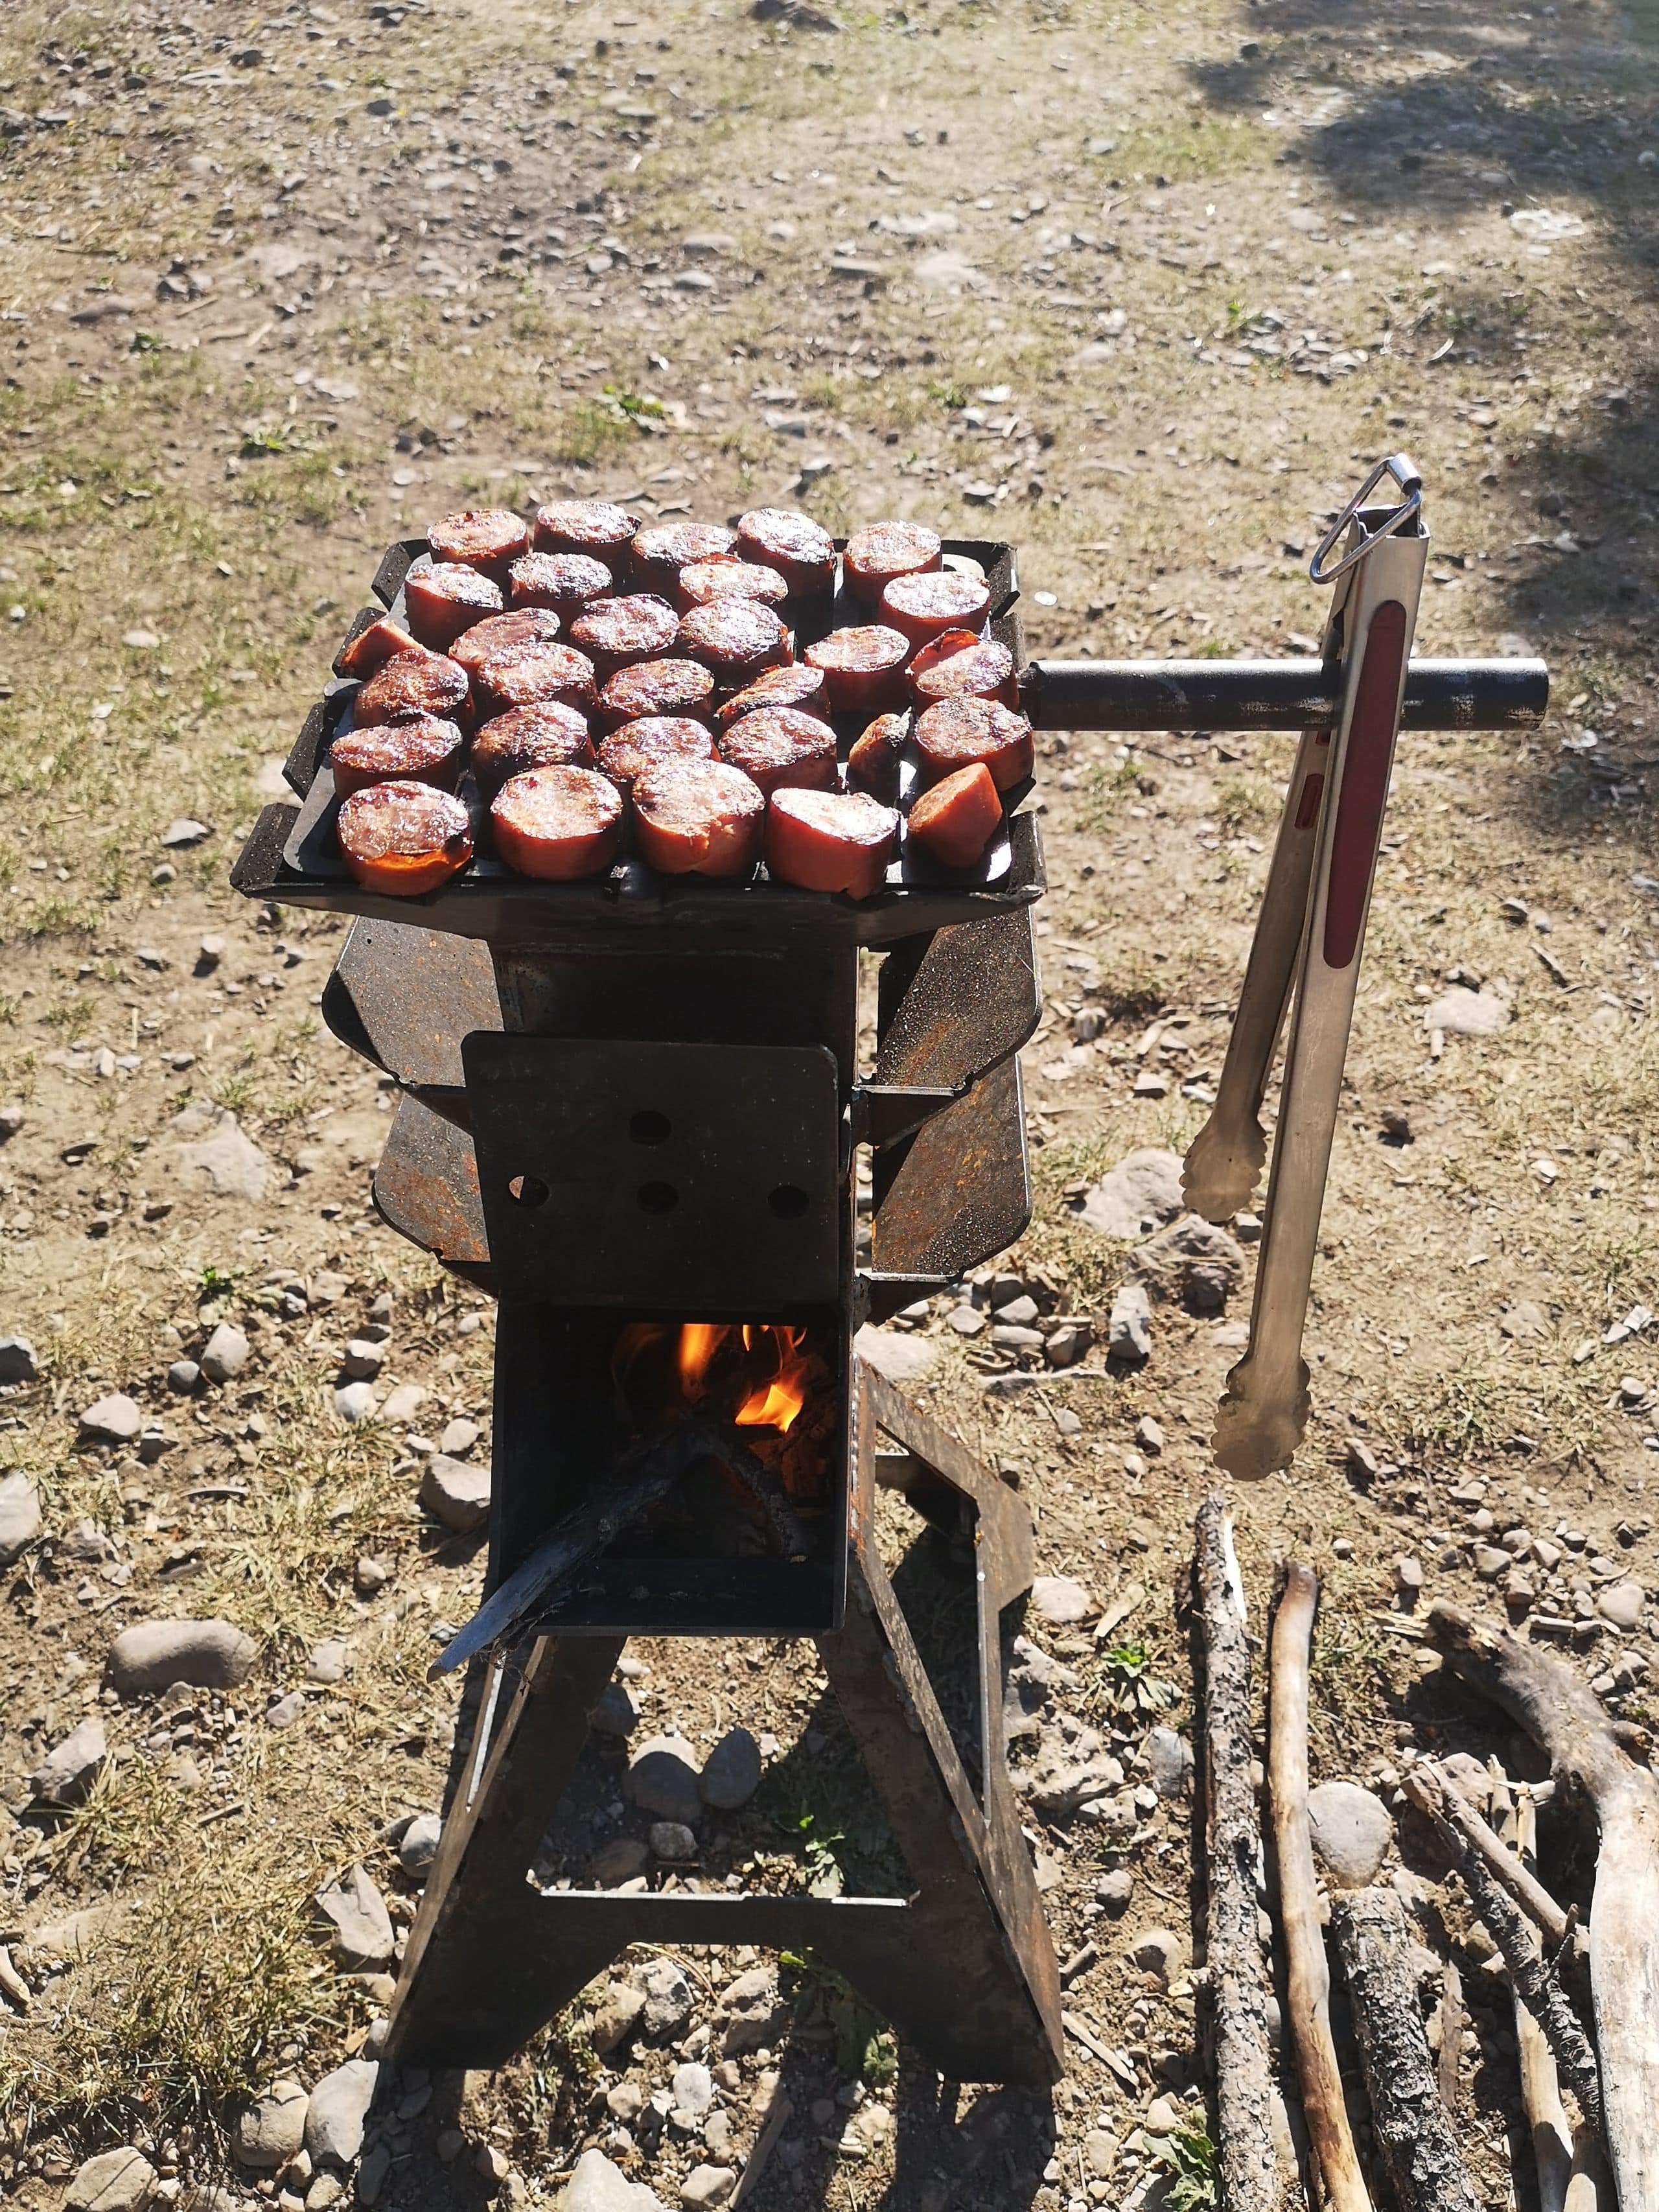 rocket stove cooking burgers outside